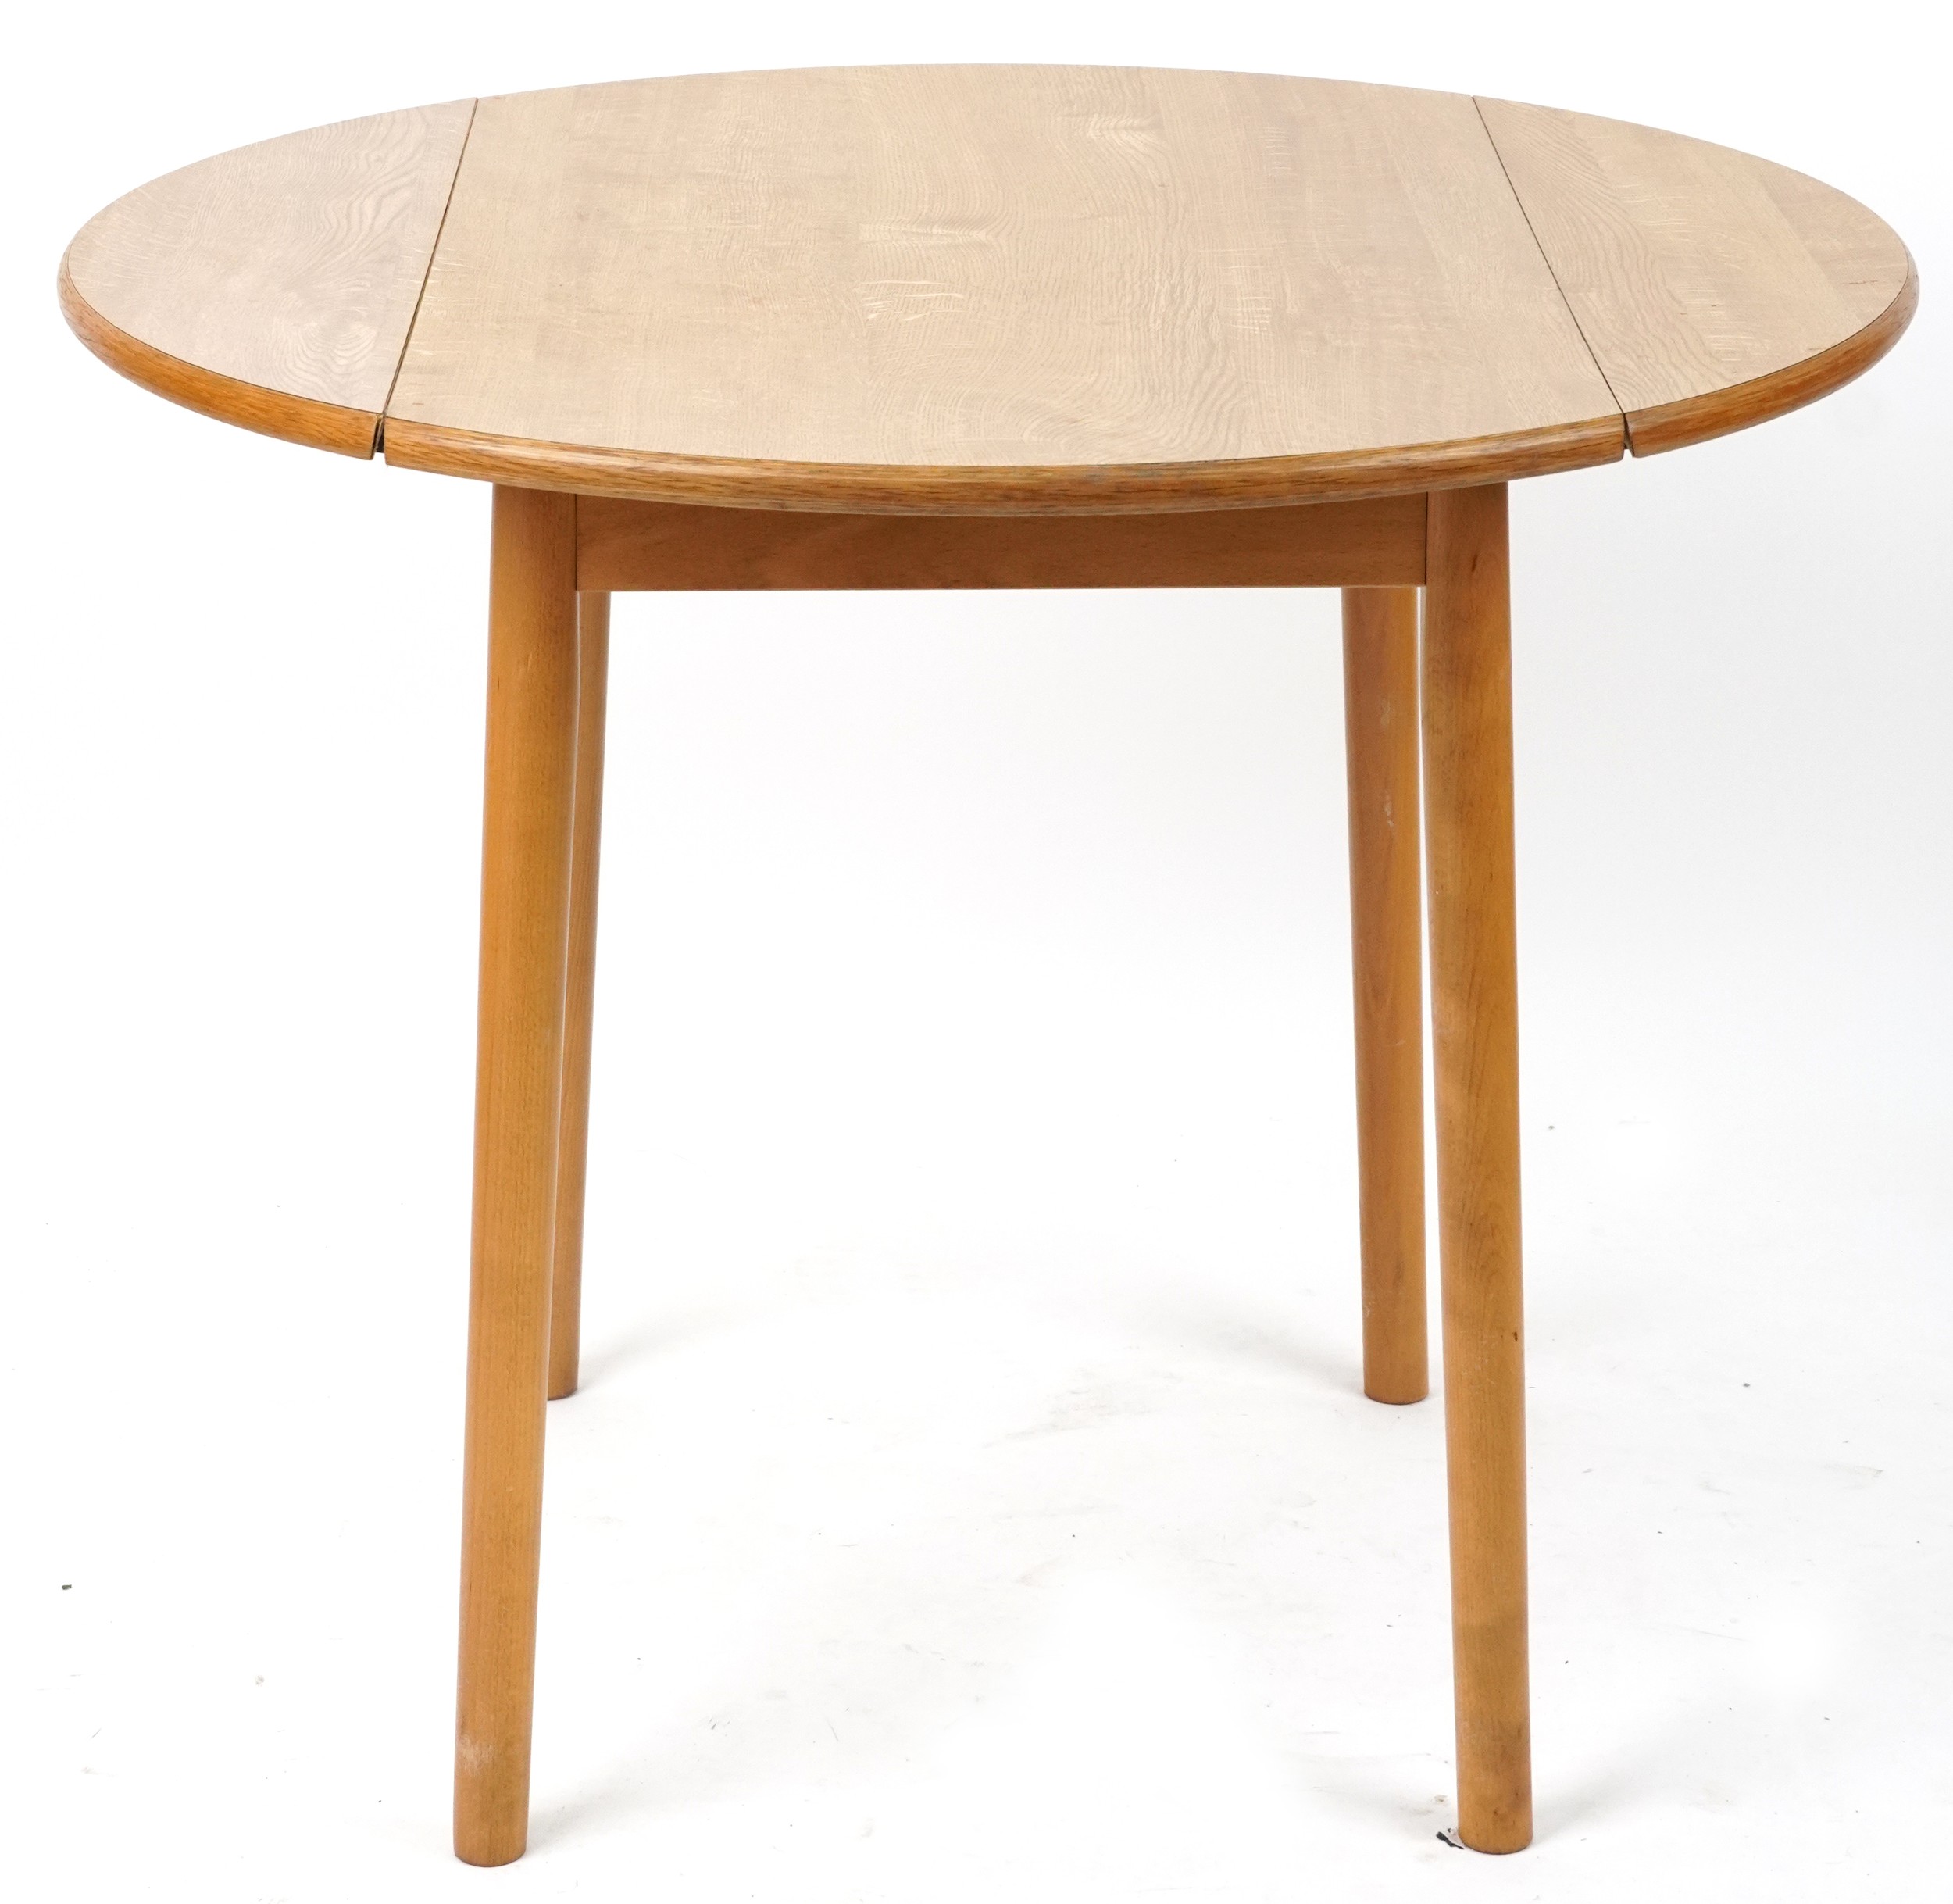 Ercol style lightwood drop end dining table with two stick back chairs, the table 74cm H x 55cm W - Image 4 of 9